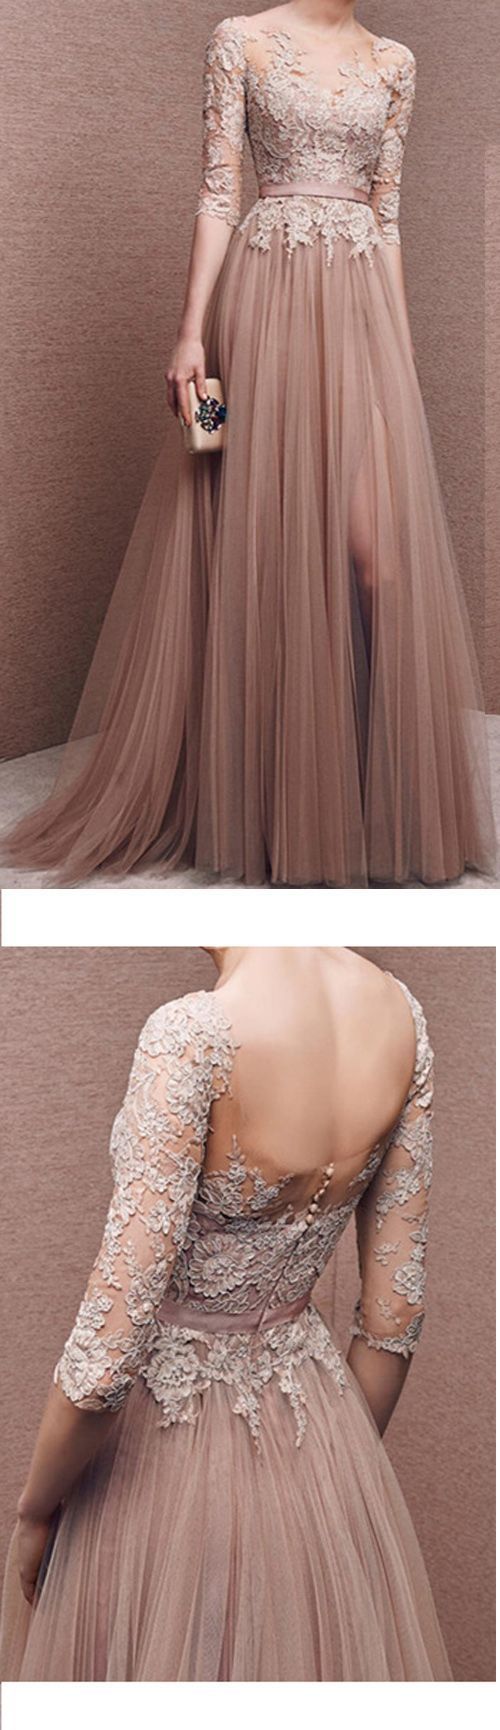 Charming Prom Dress,Tulle Prom Dress,Half-Sleeves Prom Dress,Appliques Evening Dress